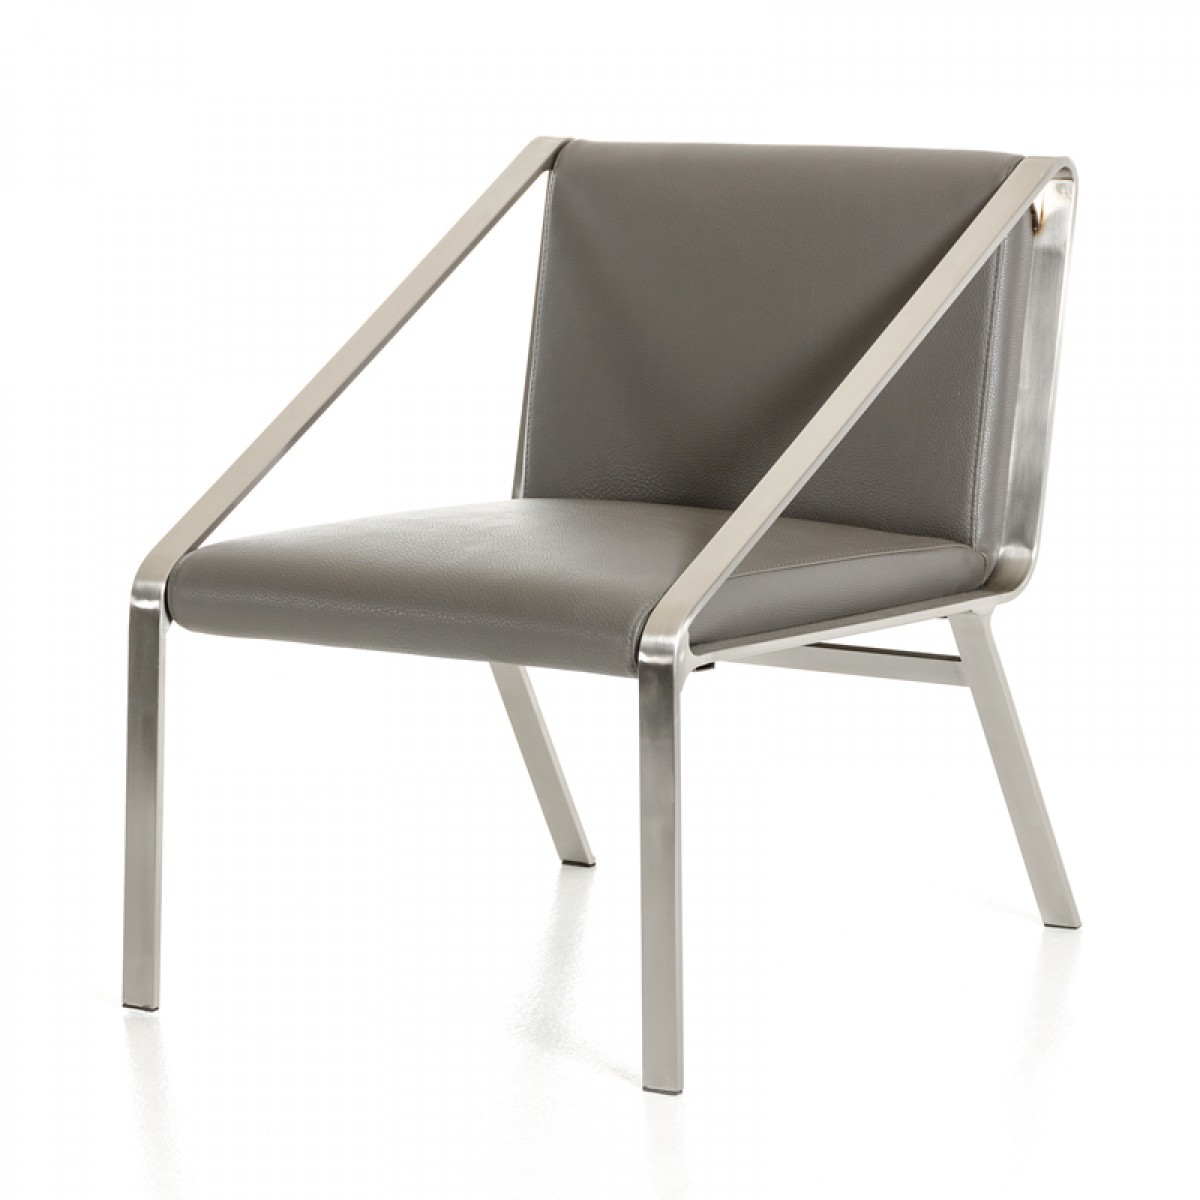 check out the new Jerry Accent Chair Grey available at AdvancedInteriorDesigns.com